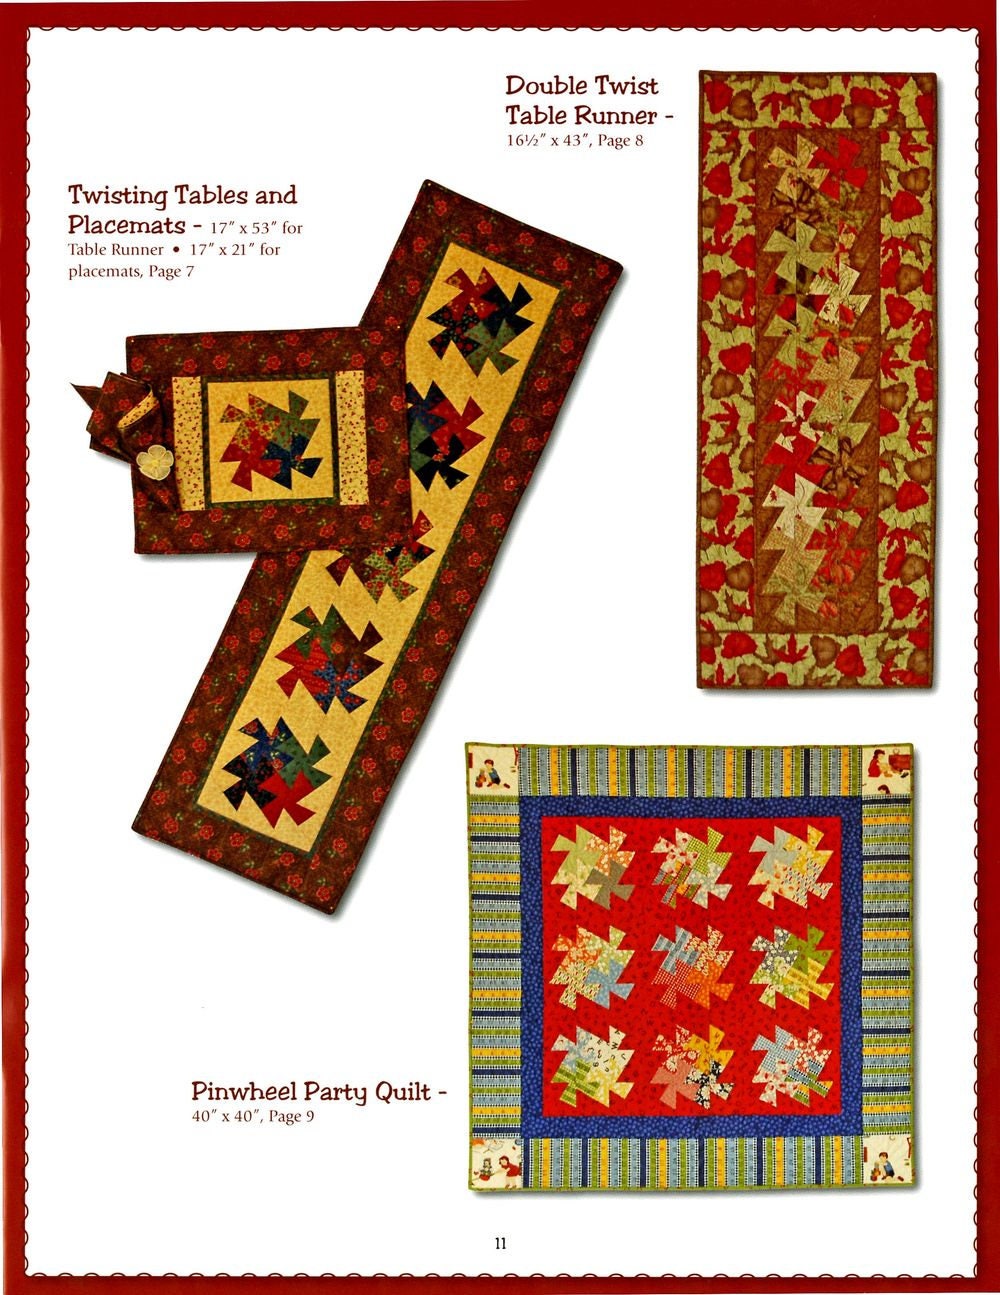 Let's Twist Quilt Pattern Book by Marsha Bergren for Twister Sisters